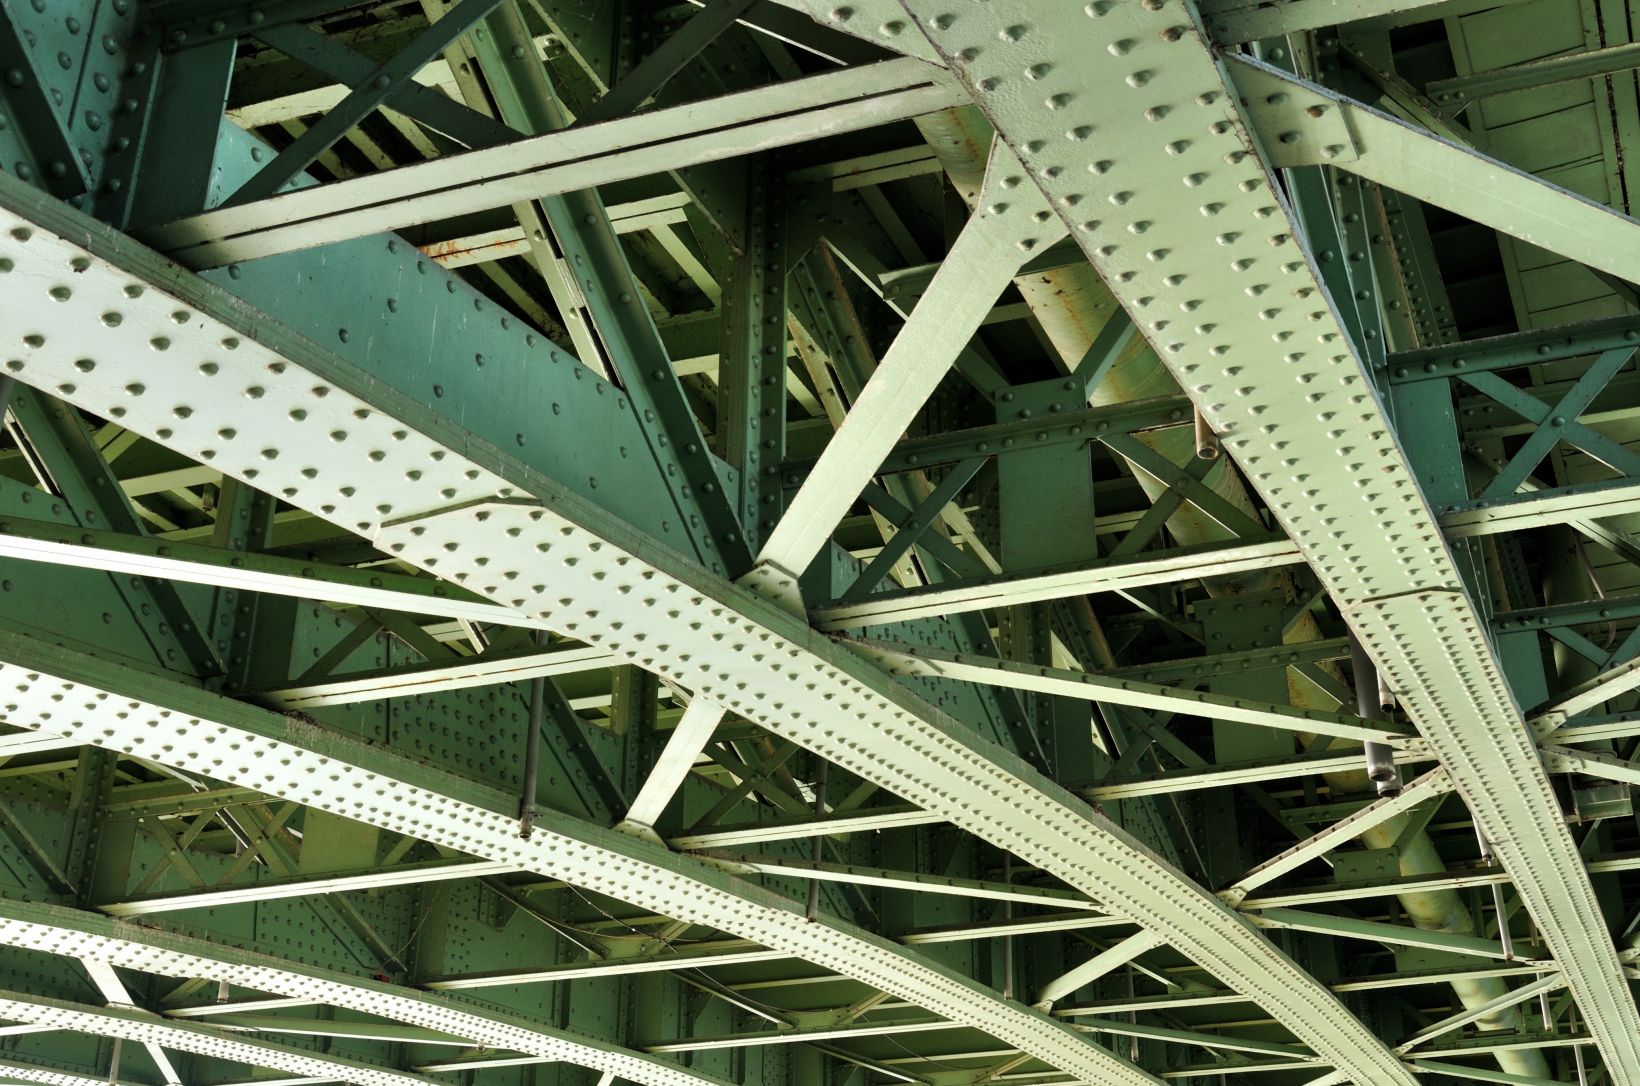 Close up of the girders of a steel bridge construction demonstrating the parts of the structure that are subjected to cyclical loading